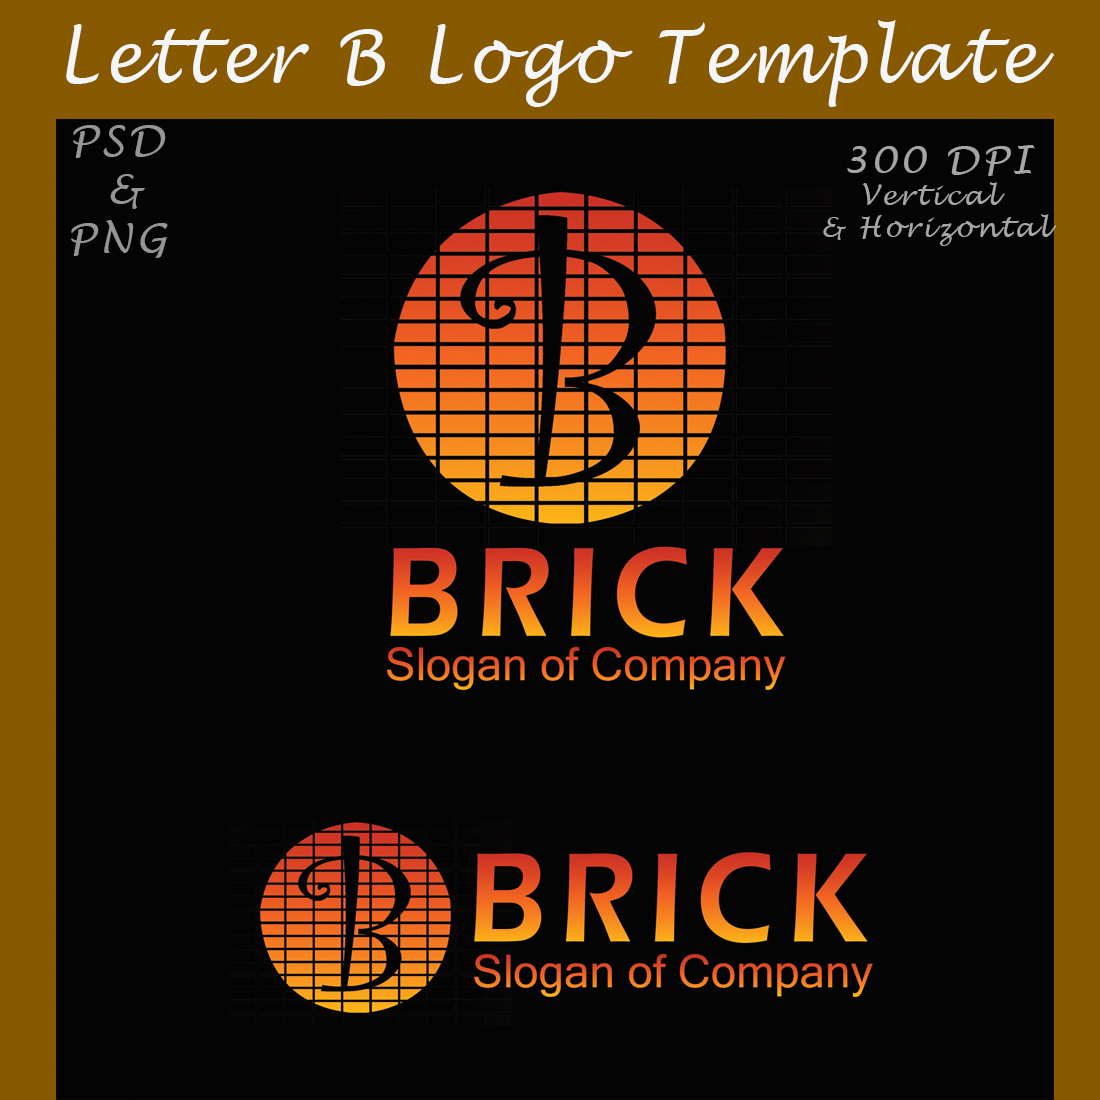 Classic & Beautiful Letter B Logo Template cover image.